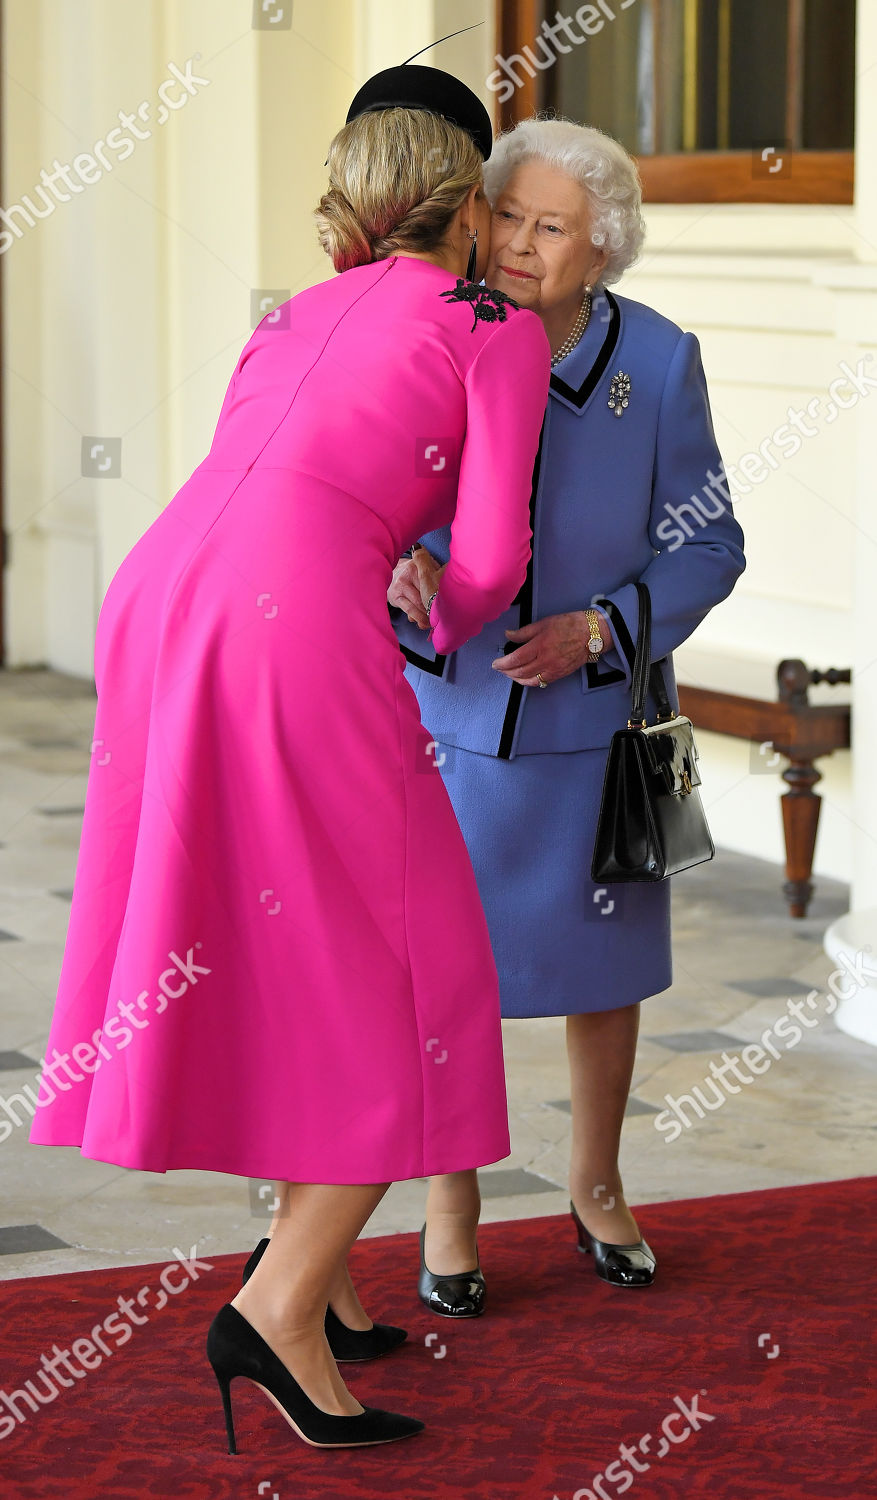 state-visit-of-the-king-and-queen-of-the-netherlands-london-uk-shutterstock-editorial-9943186h.jpg